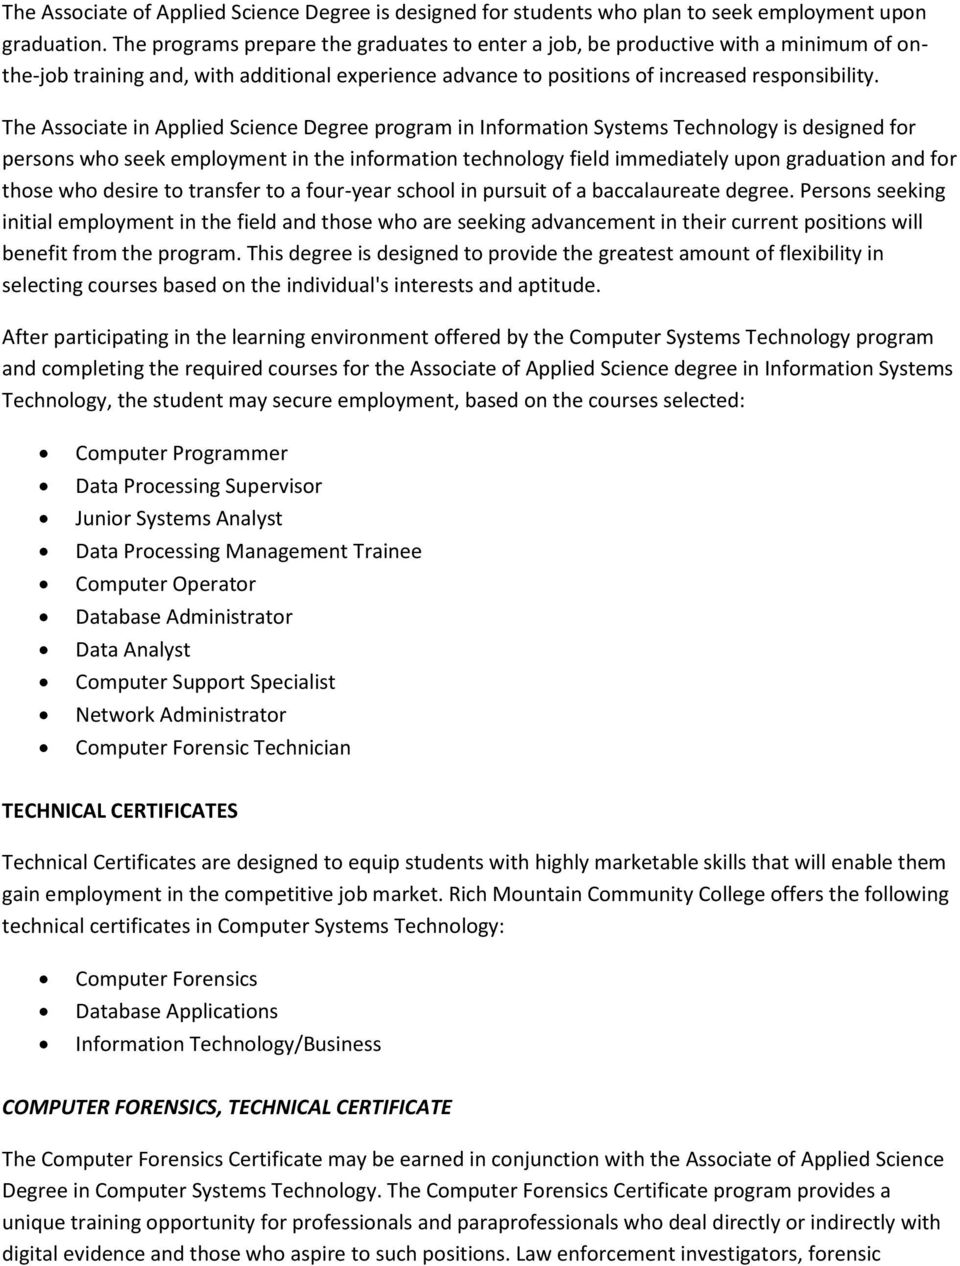 The Associate in Applied Science Degree program in Information Systems Technology is designed for persons who seek employment in the information technology field immediately upon graduation and for